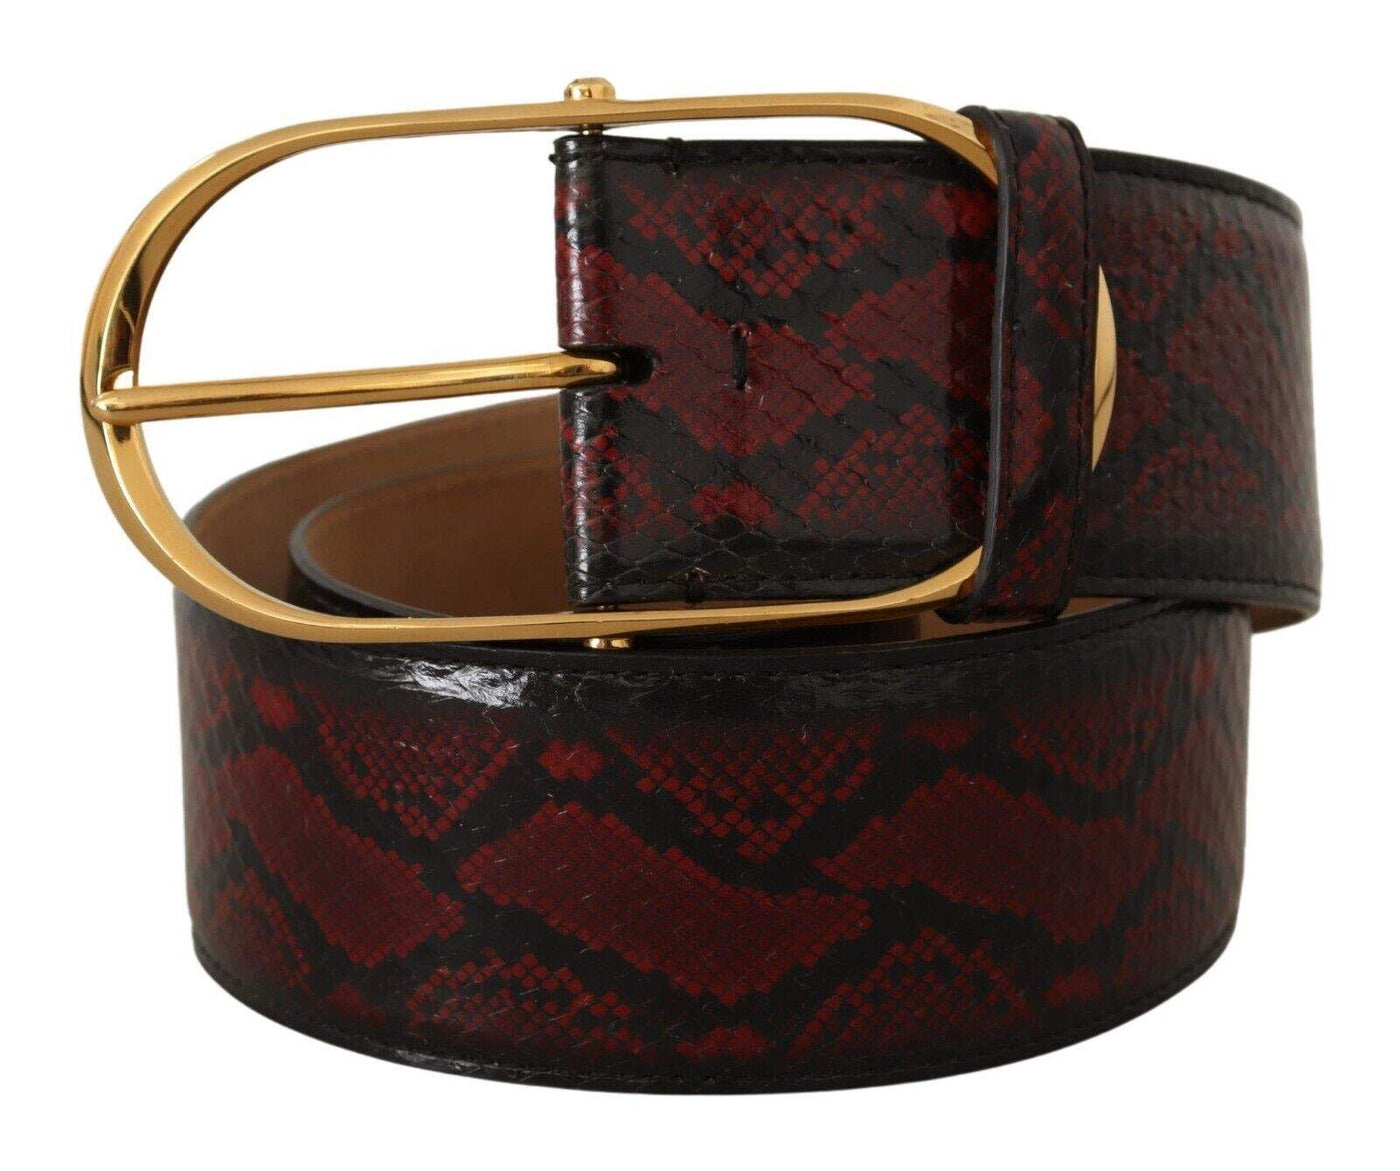 Dolce & Gabbana Red Exotic Leather Gold Oval Buckle Belt 75 cm / 30 Inches, Belts - Women - Accessories, Dolce & Gabbana, feed-1, Red at SEYMAYKA